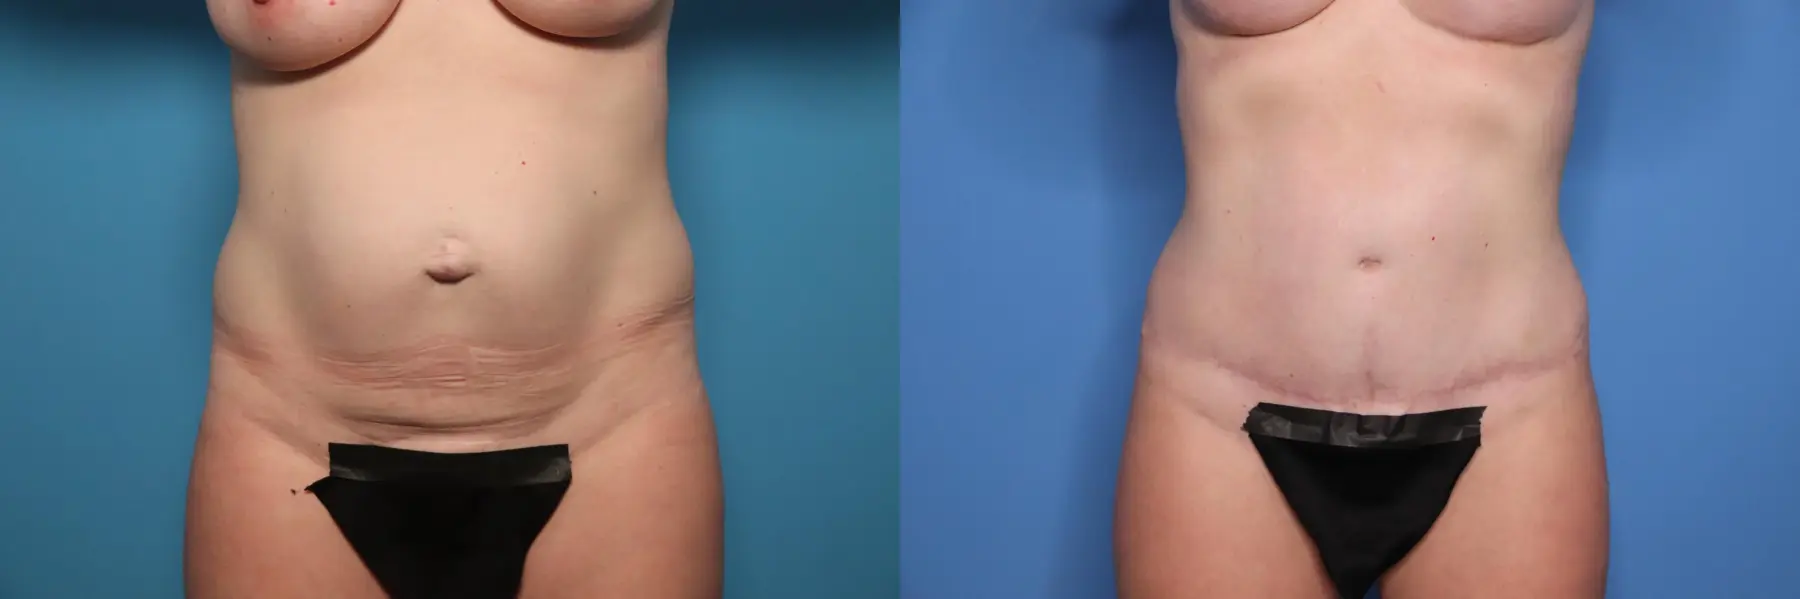 Tummy Tuck With Mesh: Patient 1 - Before and After  